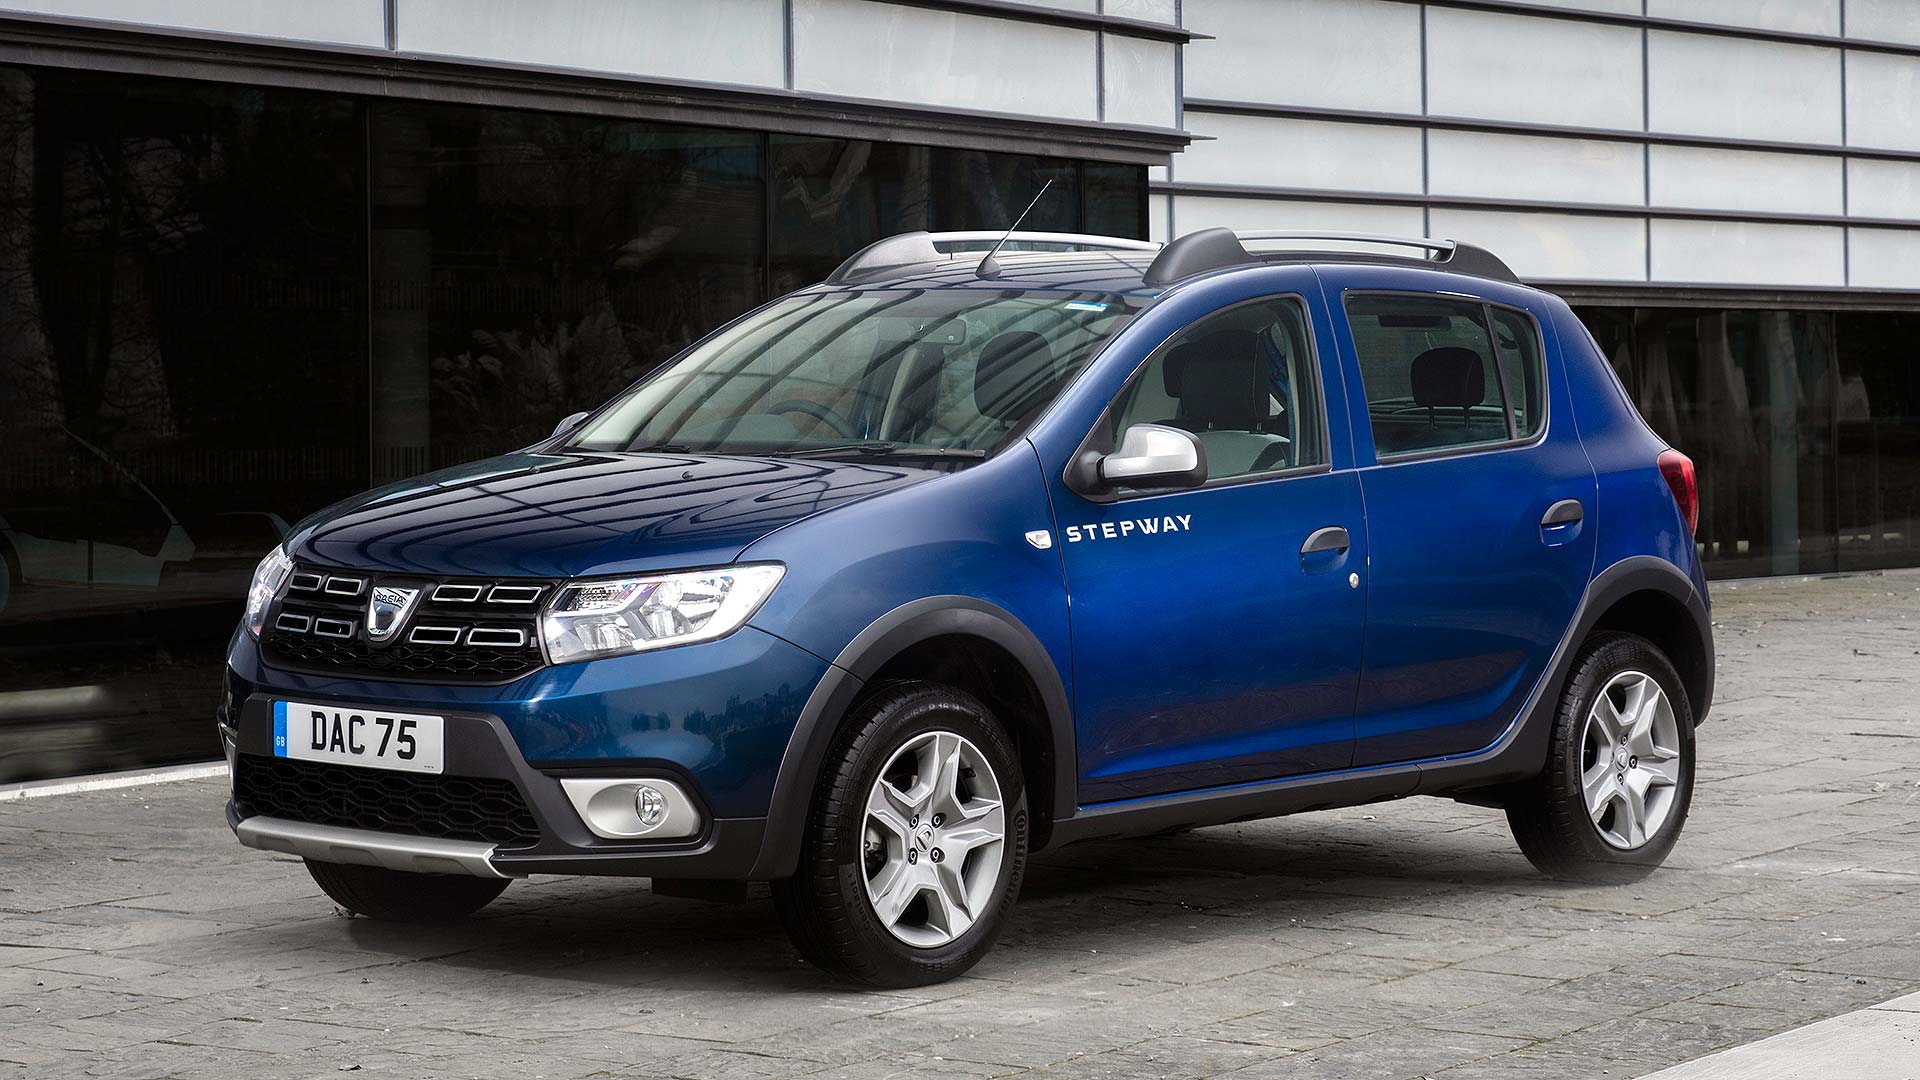 Dacia Sandero Stepway gets Essential value for 2019 - Motoring Research